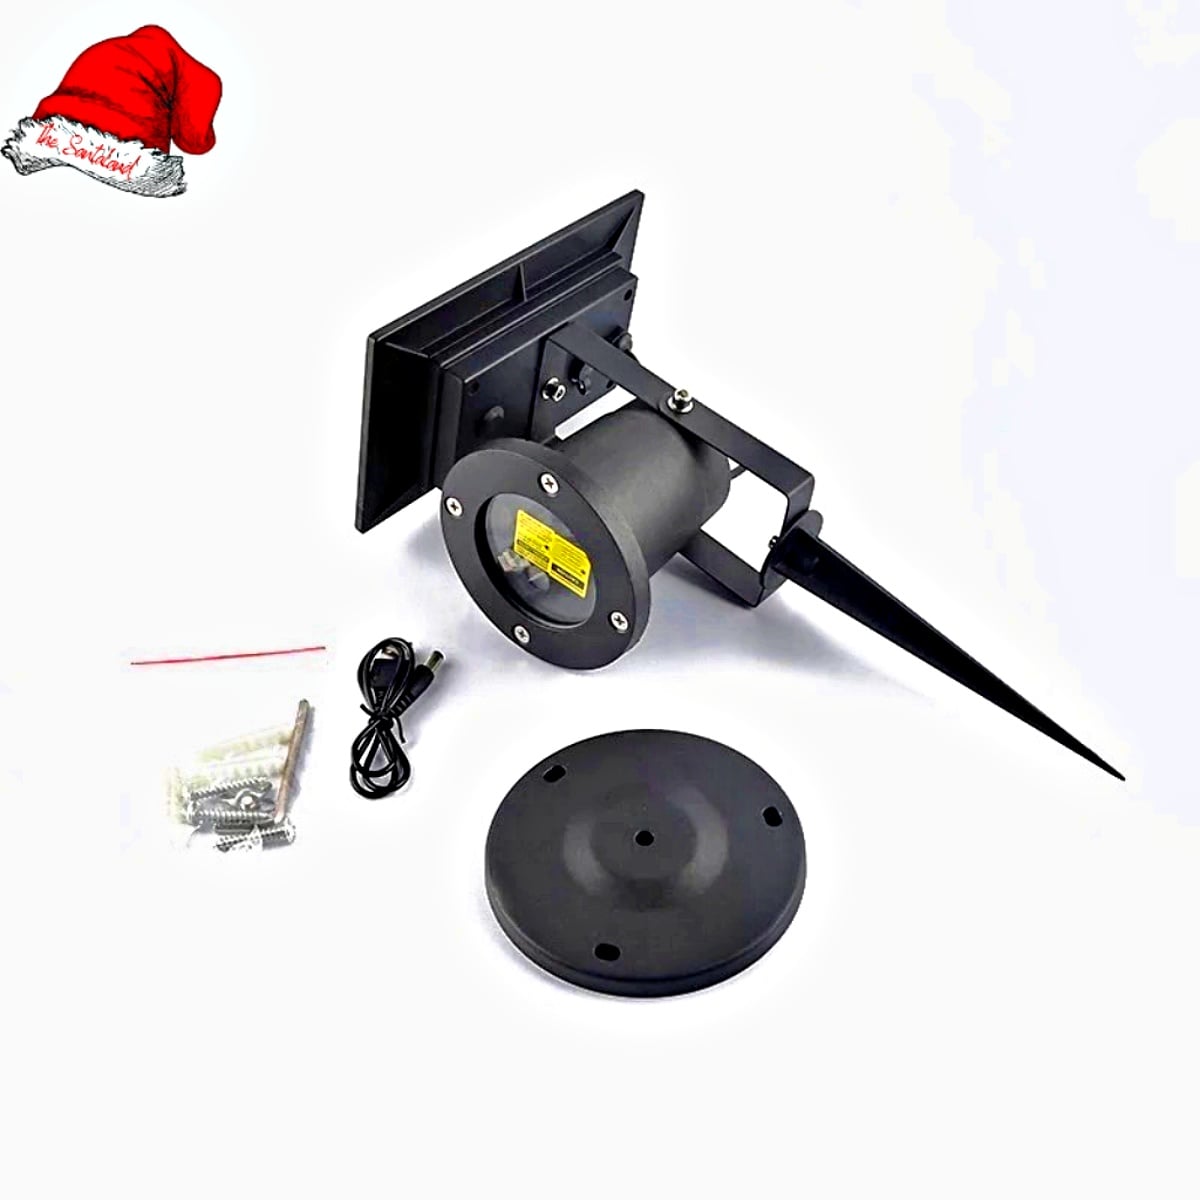 Solar powered Christmas Lights Projector, whats included - Santaland